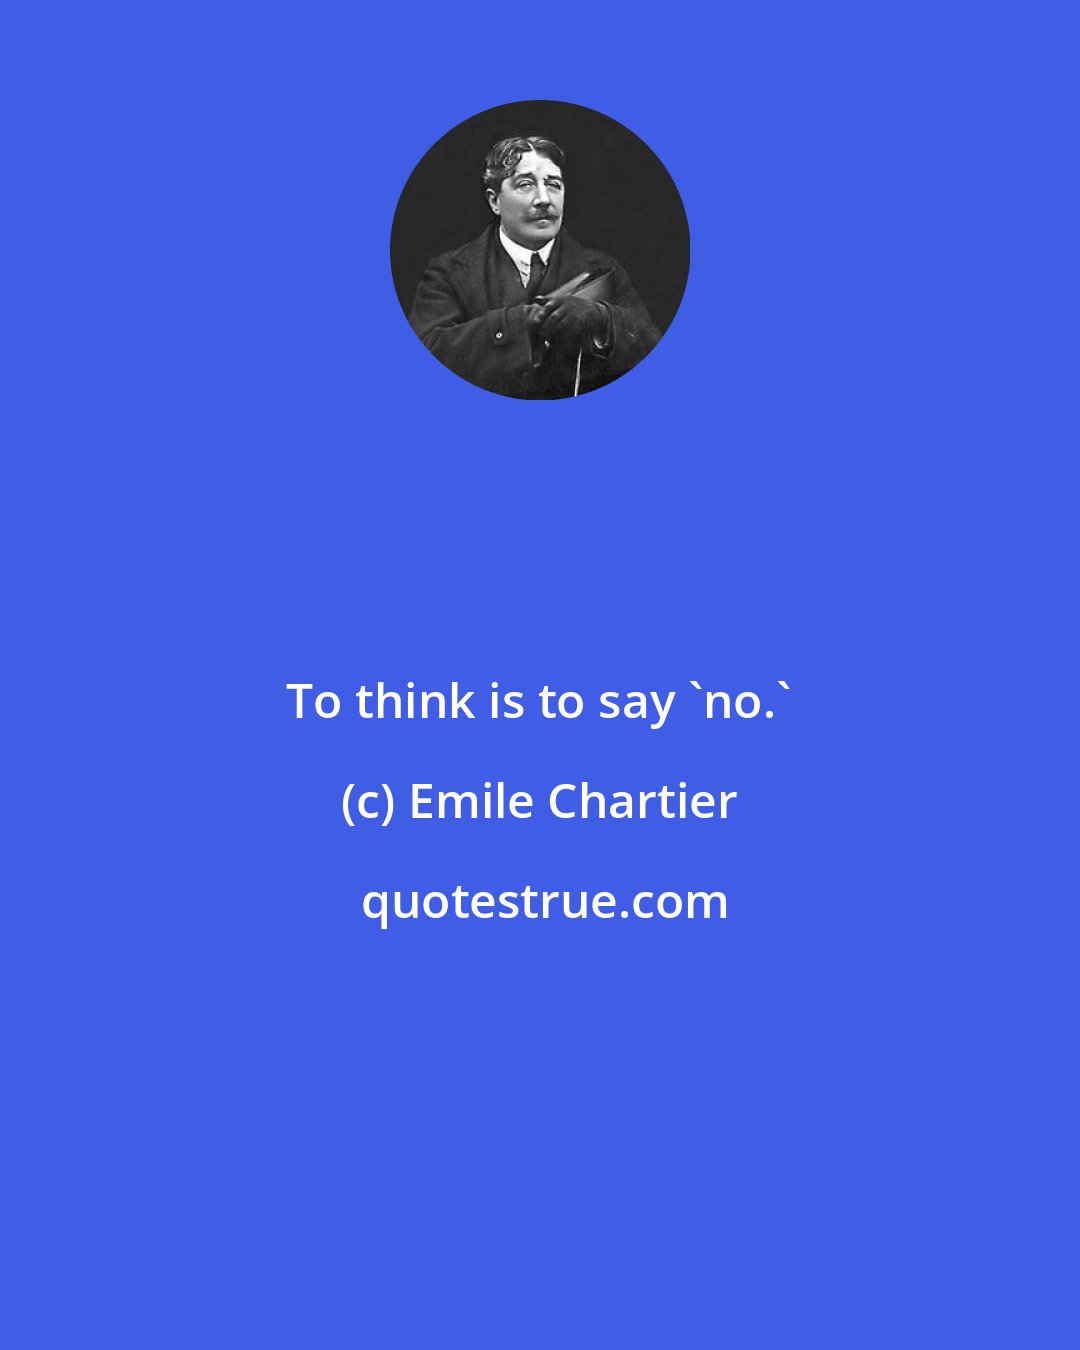 Emile Chartier: To think is to say 'no.'